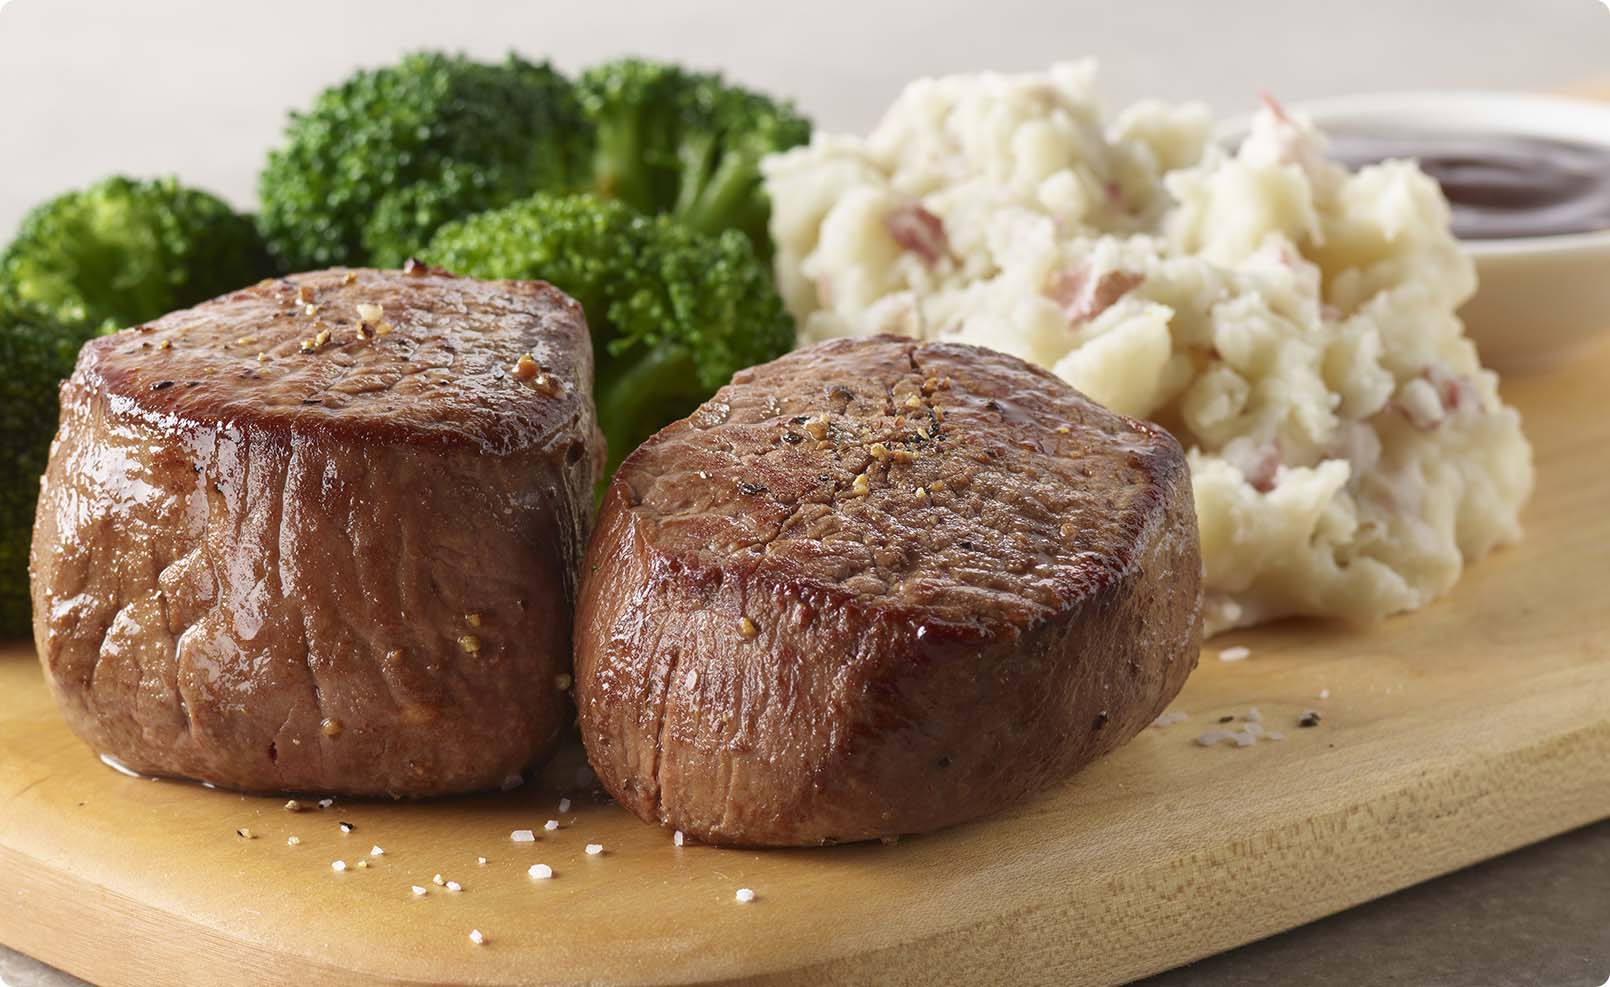 Two 4oz. golden brown filet mignon medallions glistening with red wine sauce. Served with broccoli and mashed potatoes.